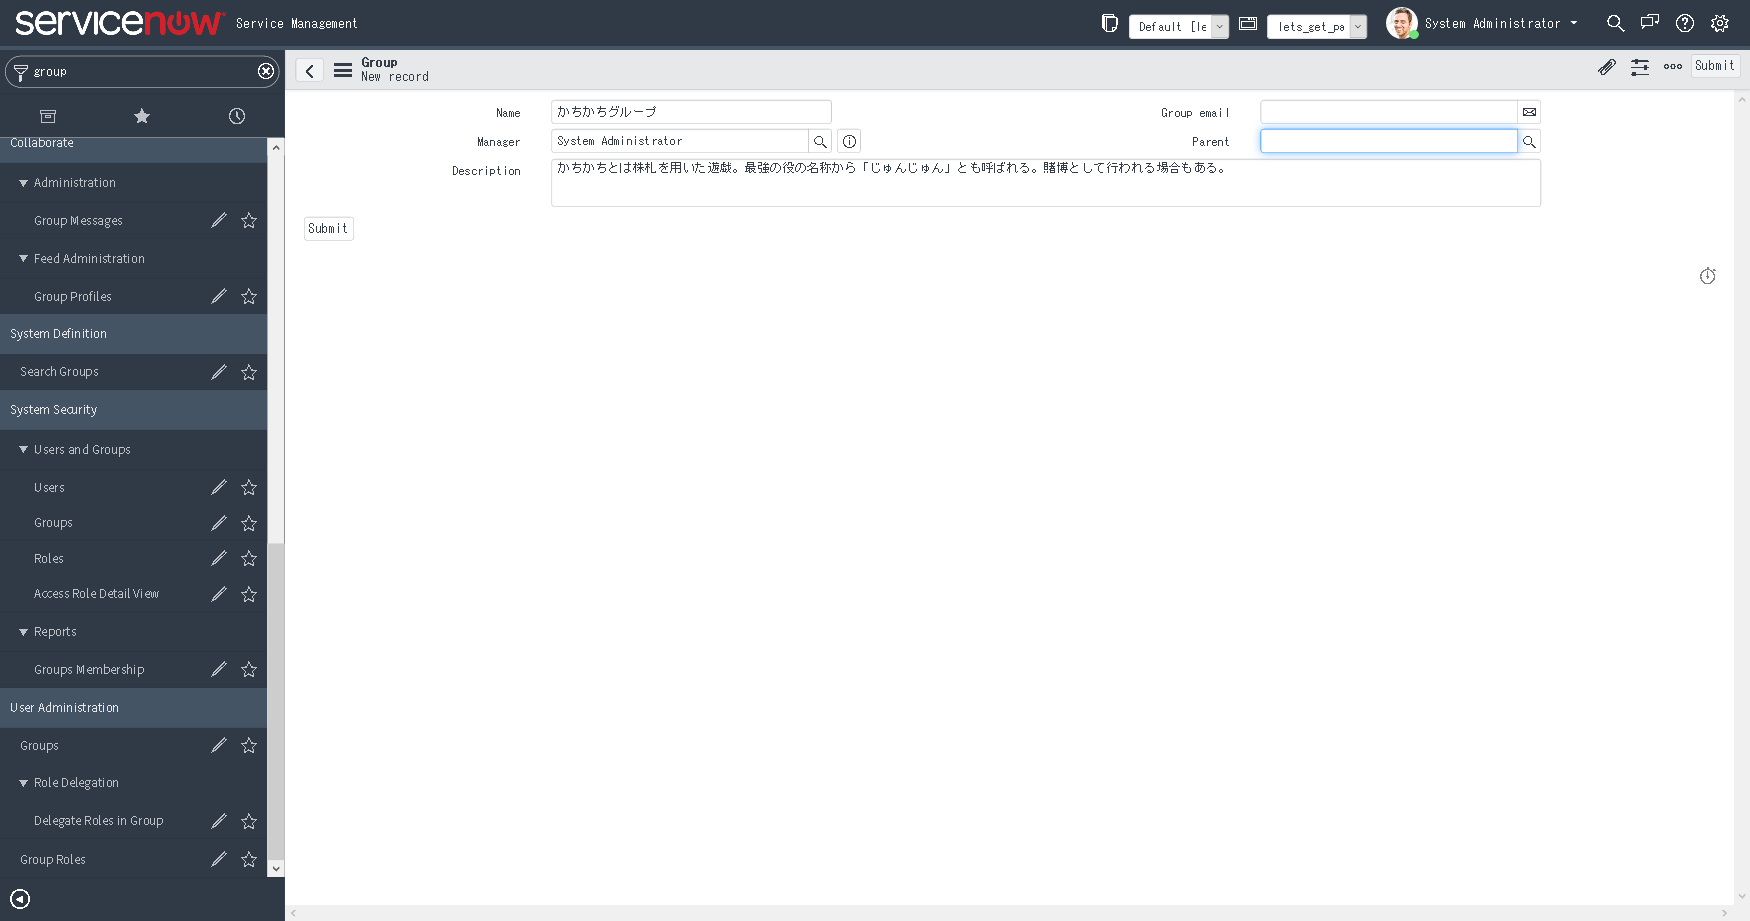 FireShot Screen Capture #197 - 'Group I ServiceNow' - dev12747_service-now_com_nav_to_do_uri=%2Fsys_user_group_do%3Fsys_id%3D-1%26sys_is_list%3Dtrue%2.png